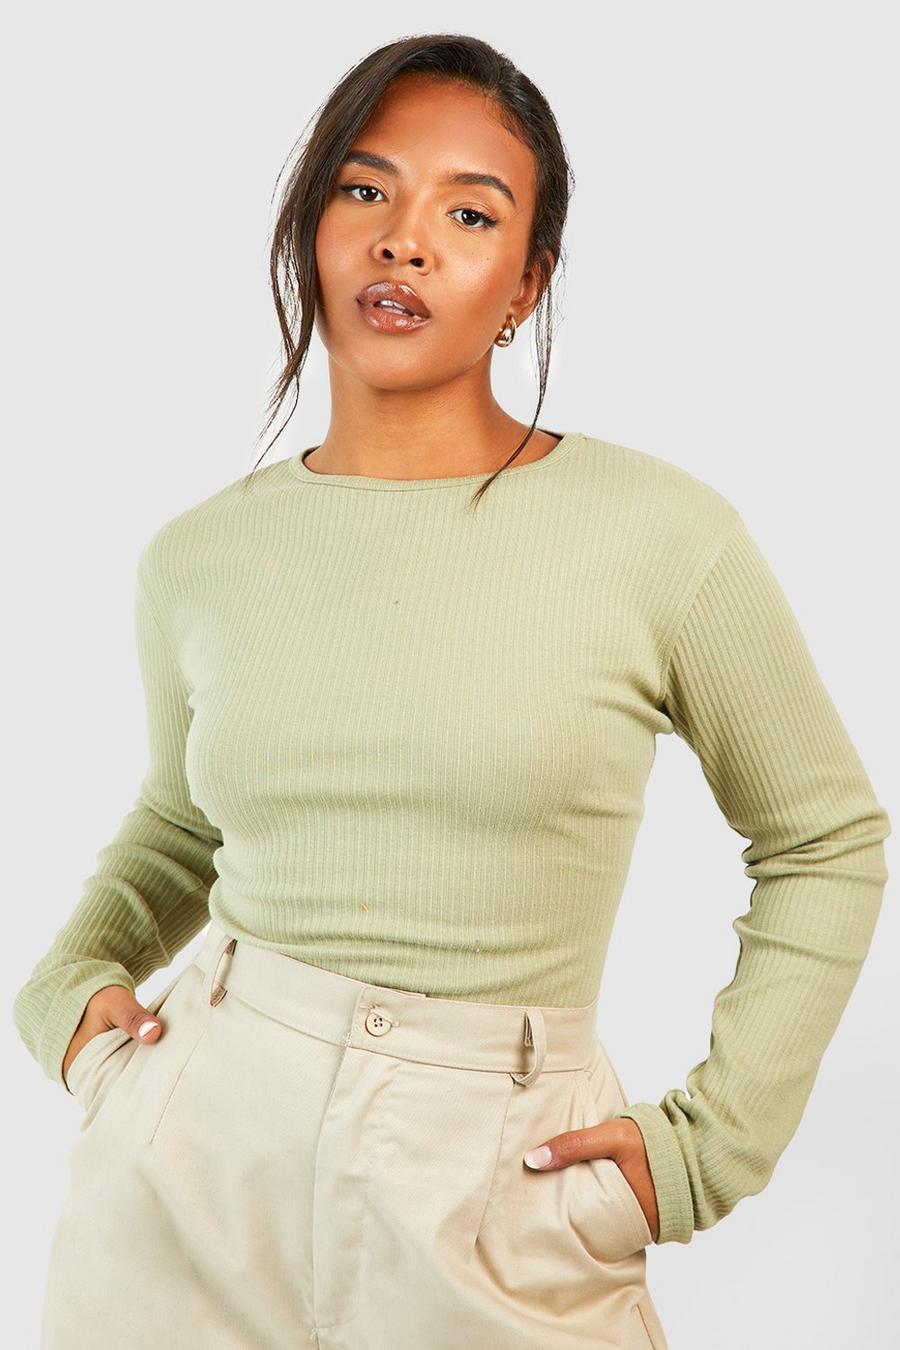 Buy Boohoo Tall Soft Ribbed Notch Neck Long Sleeves Bodysuit Top